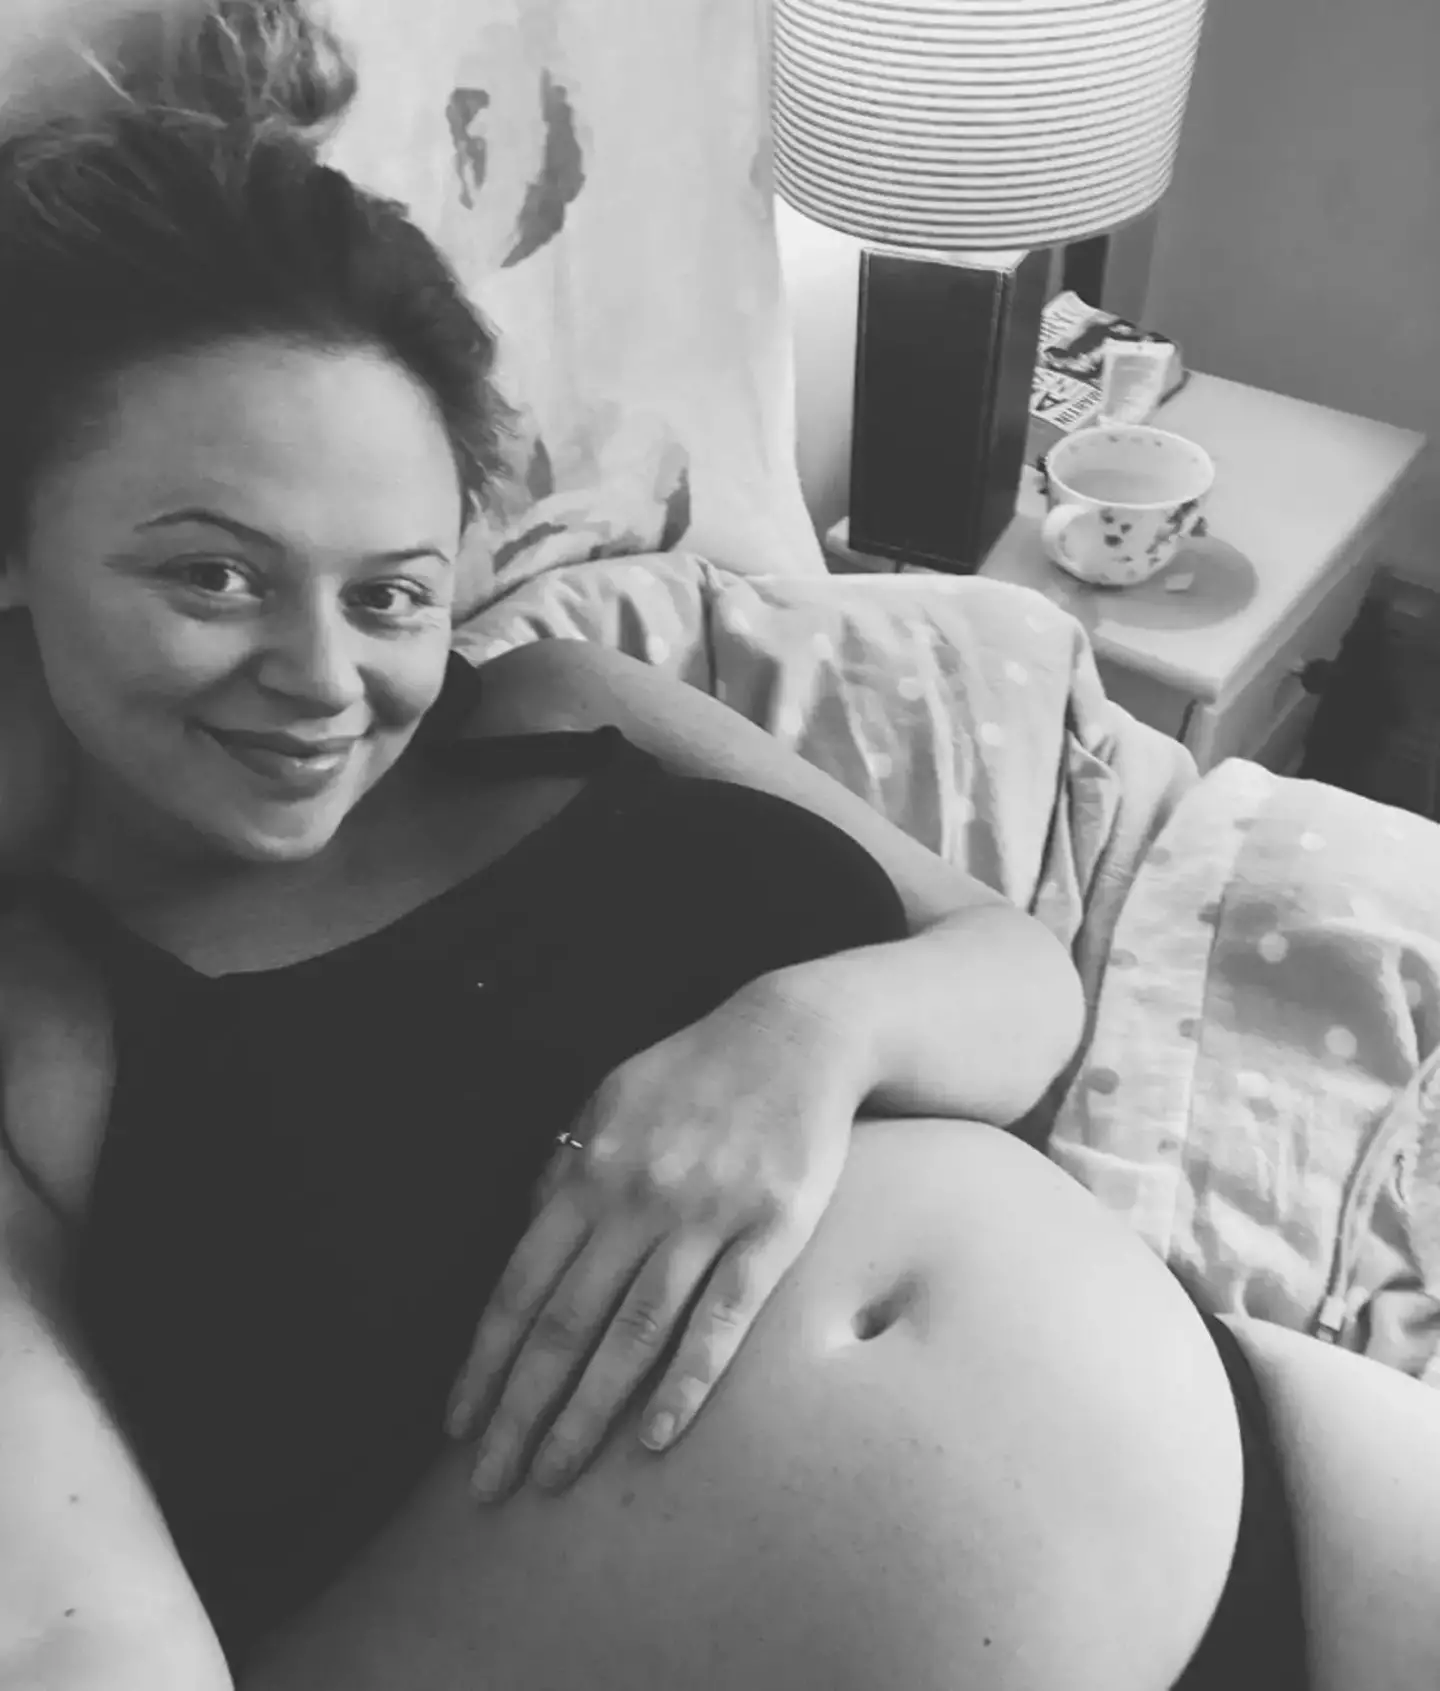 Emily Atack has announced she is pregnant with her first child.